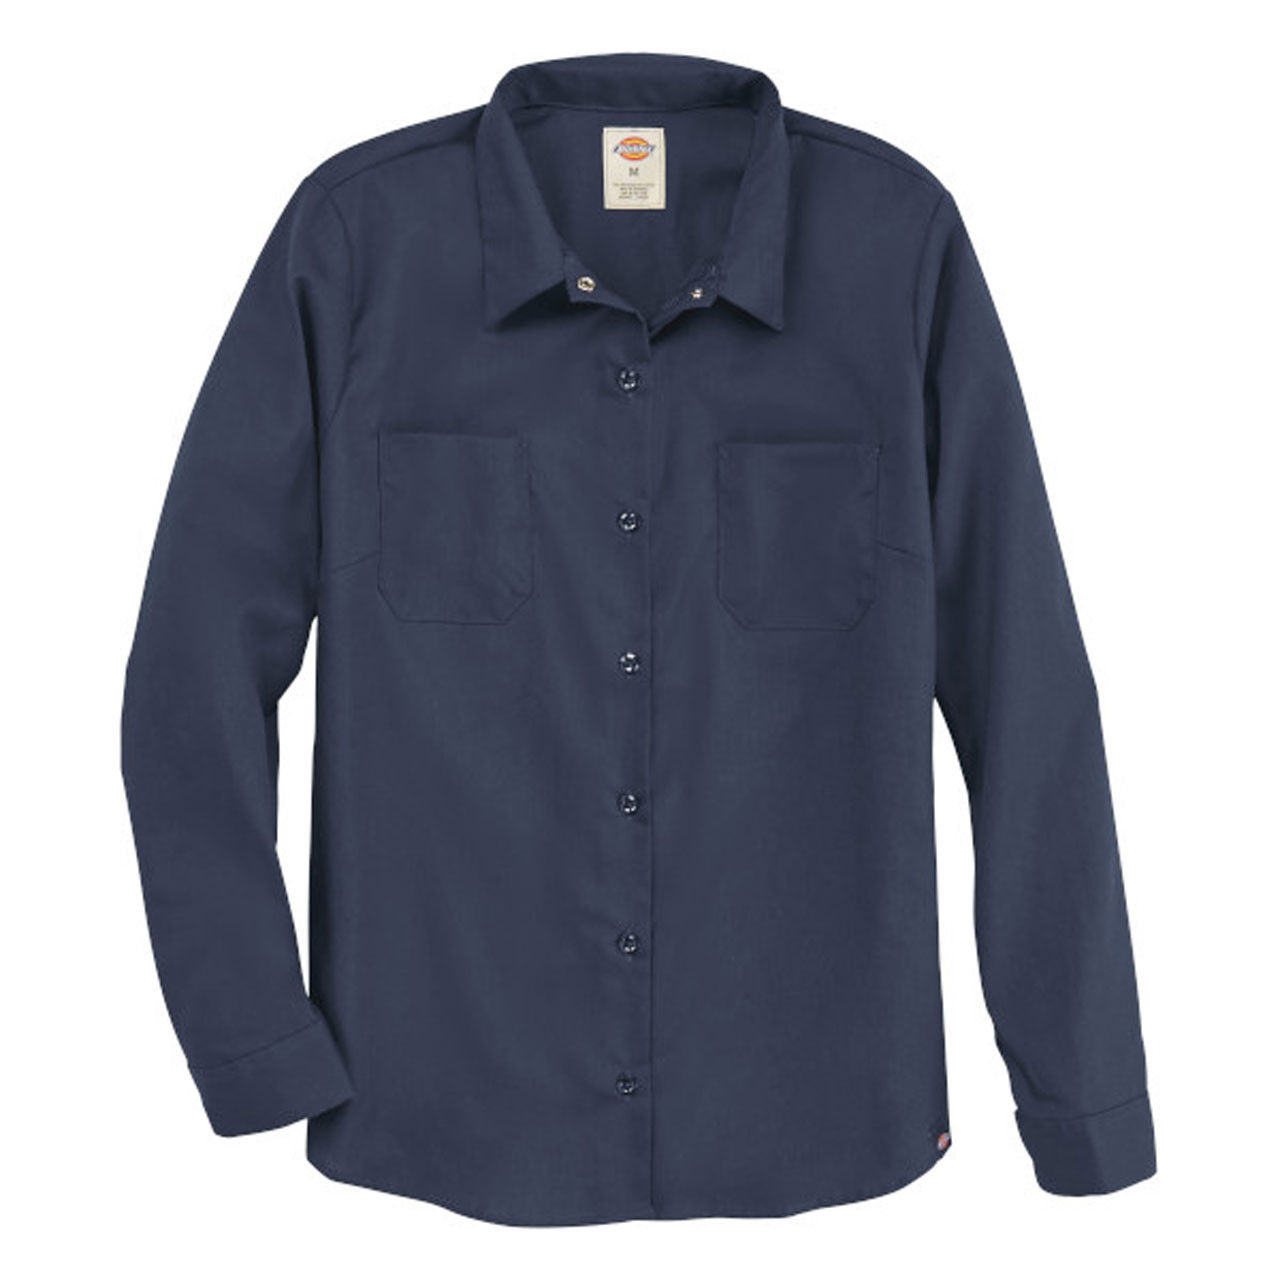 Does the dark blue work shirt come with any pockets?